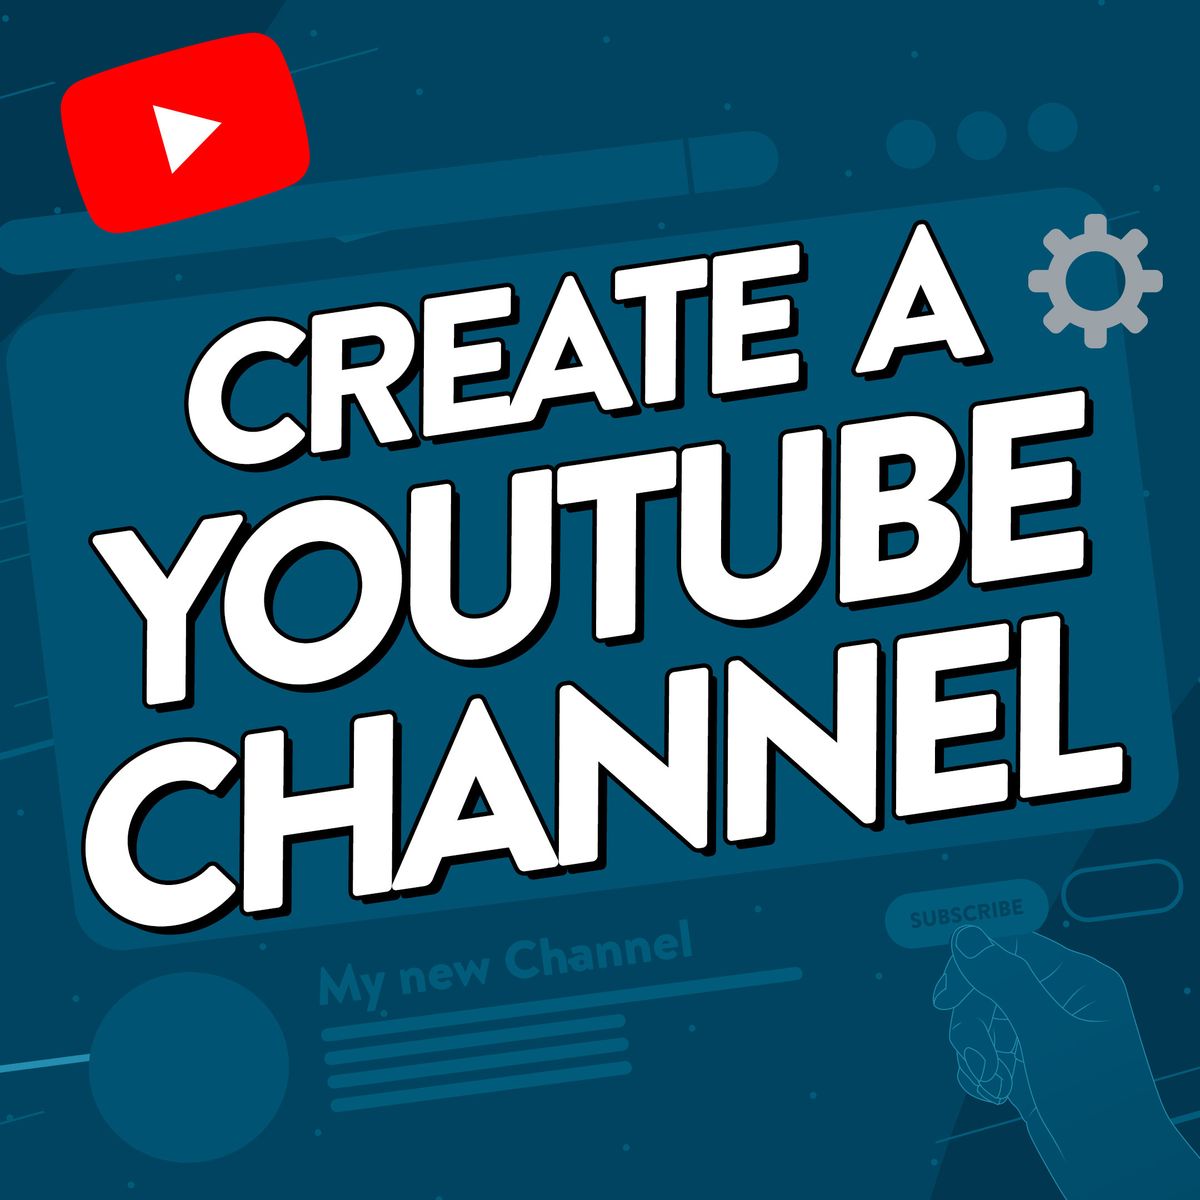 Illustration of a YouTube channel being created behind text saying 'create a YouTube channel.'